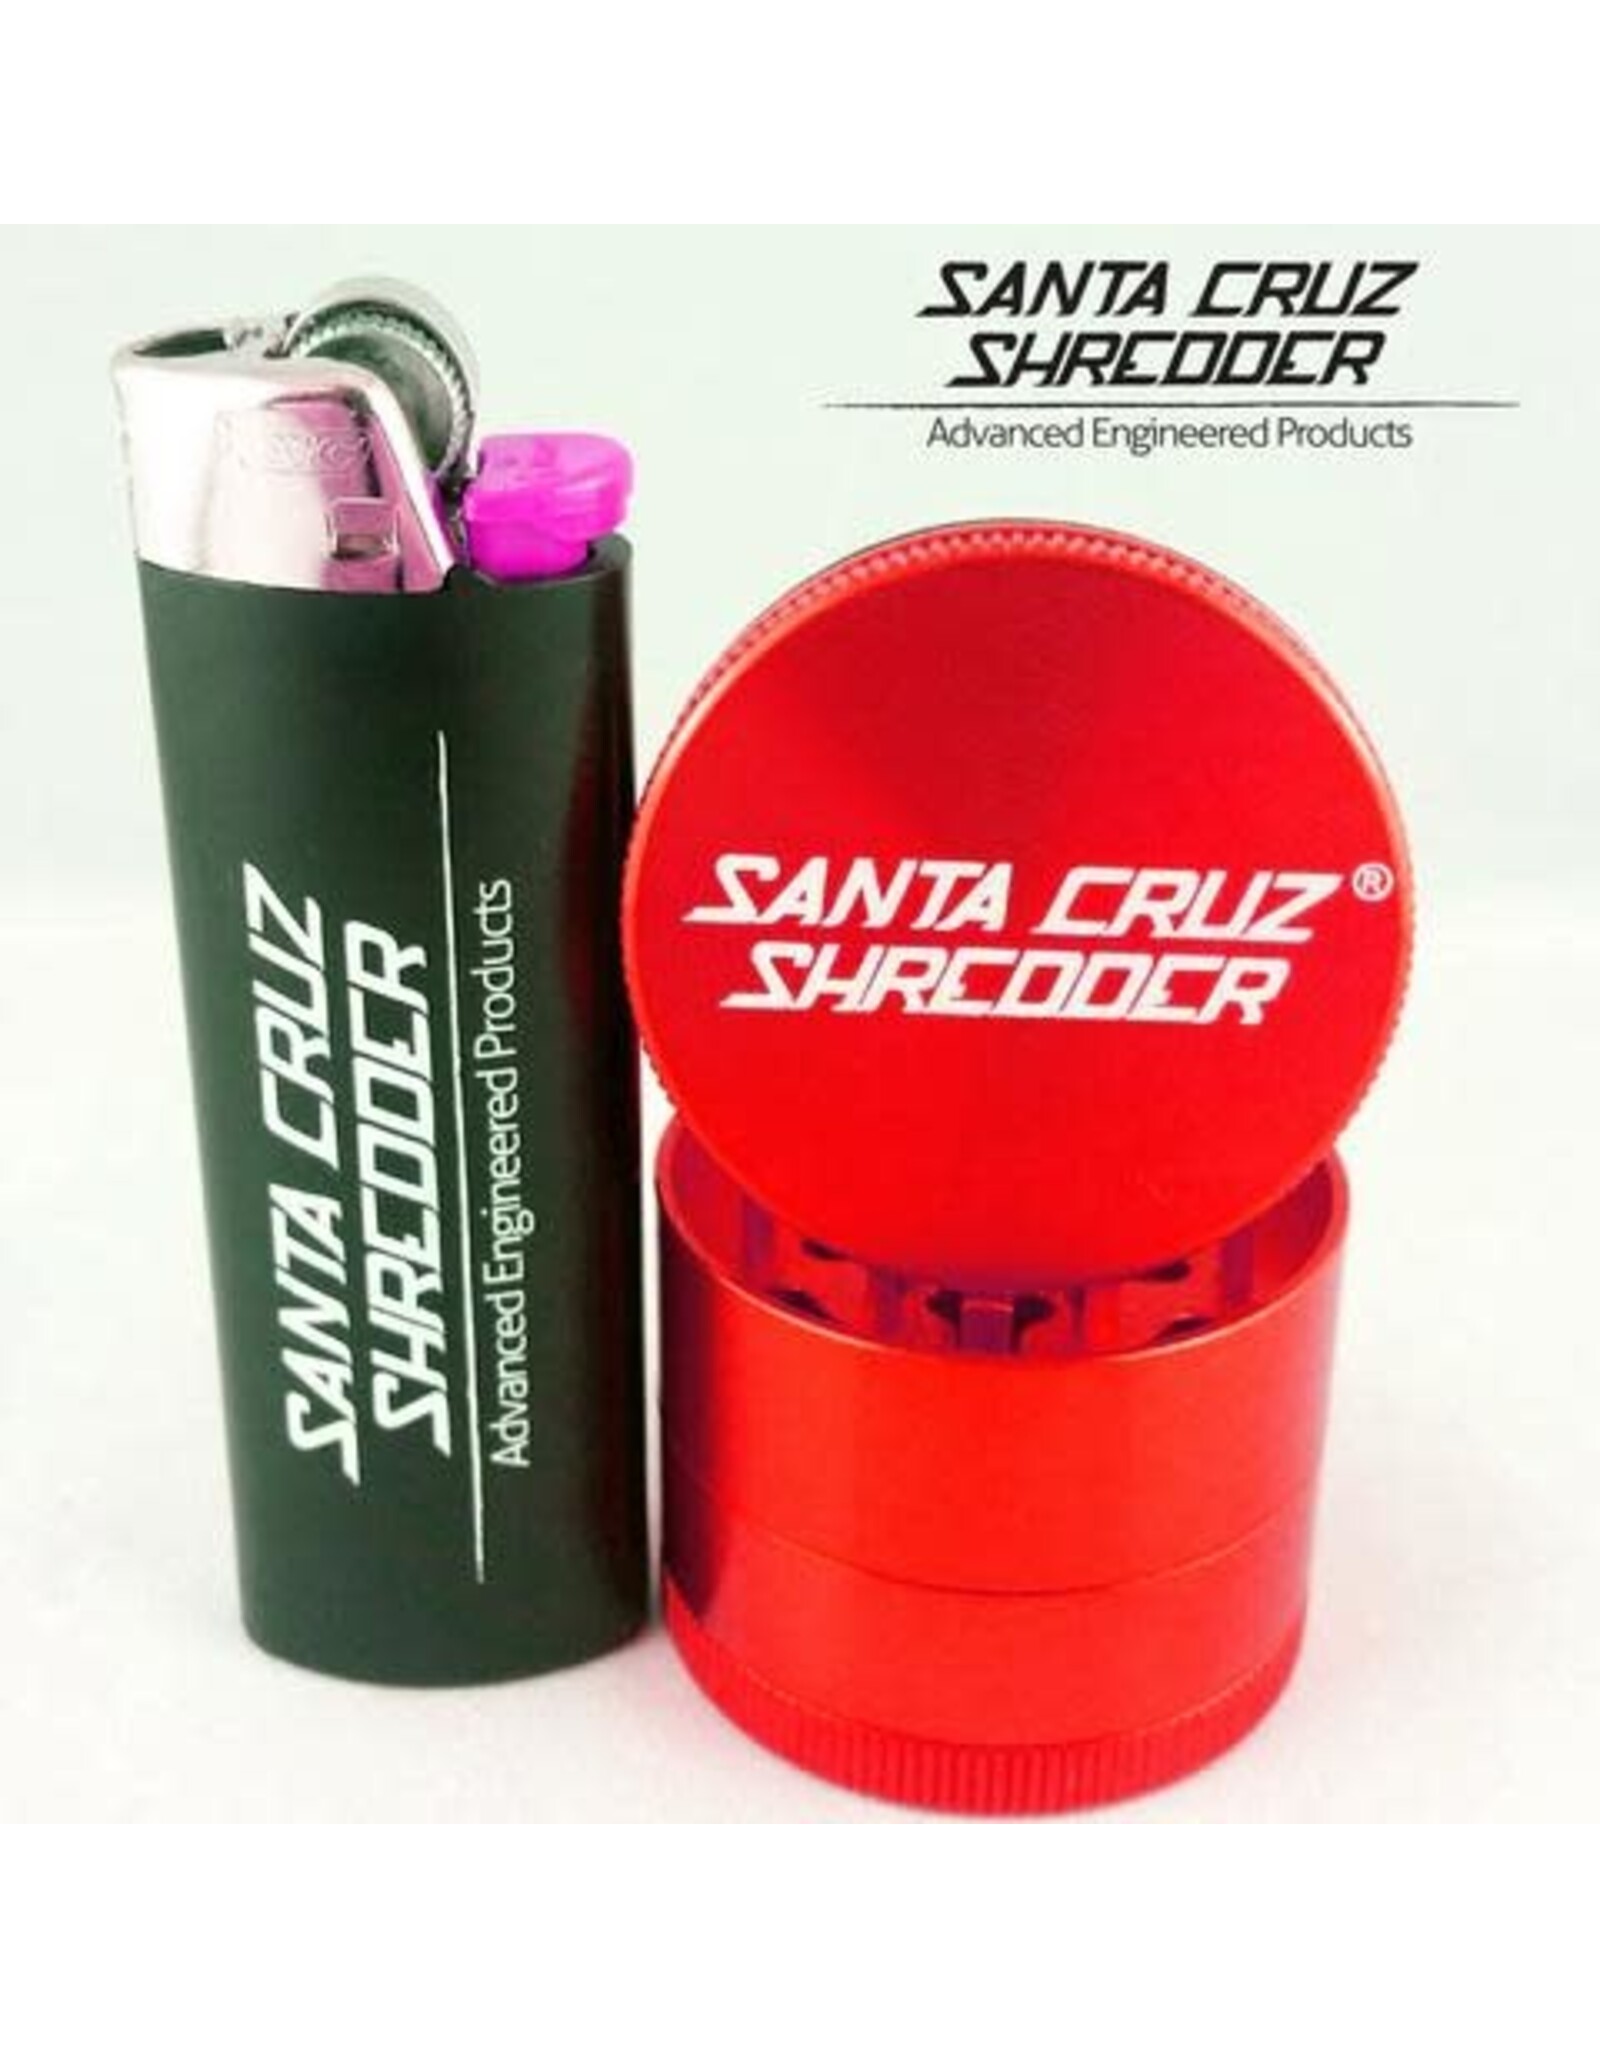 Santa Cruz Shredder Santa Cruz Shredder Small 4Pc Red